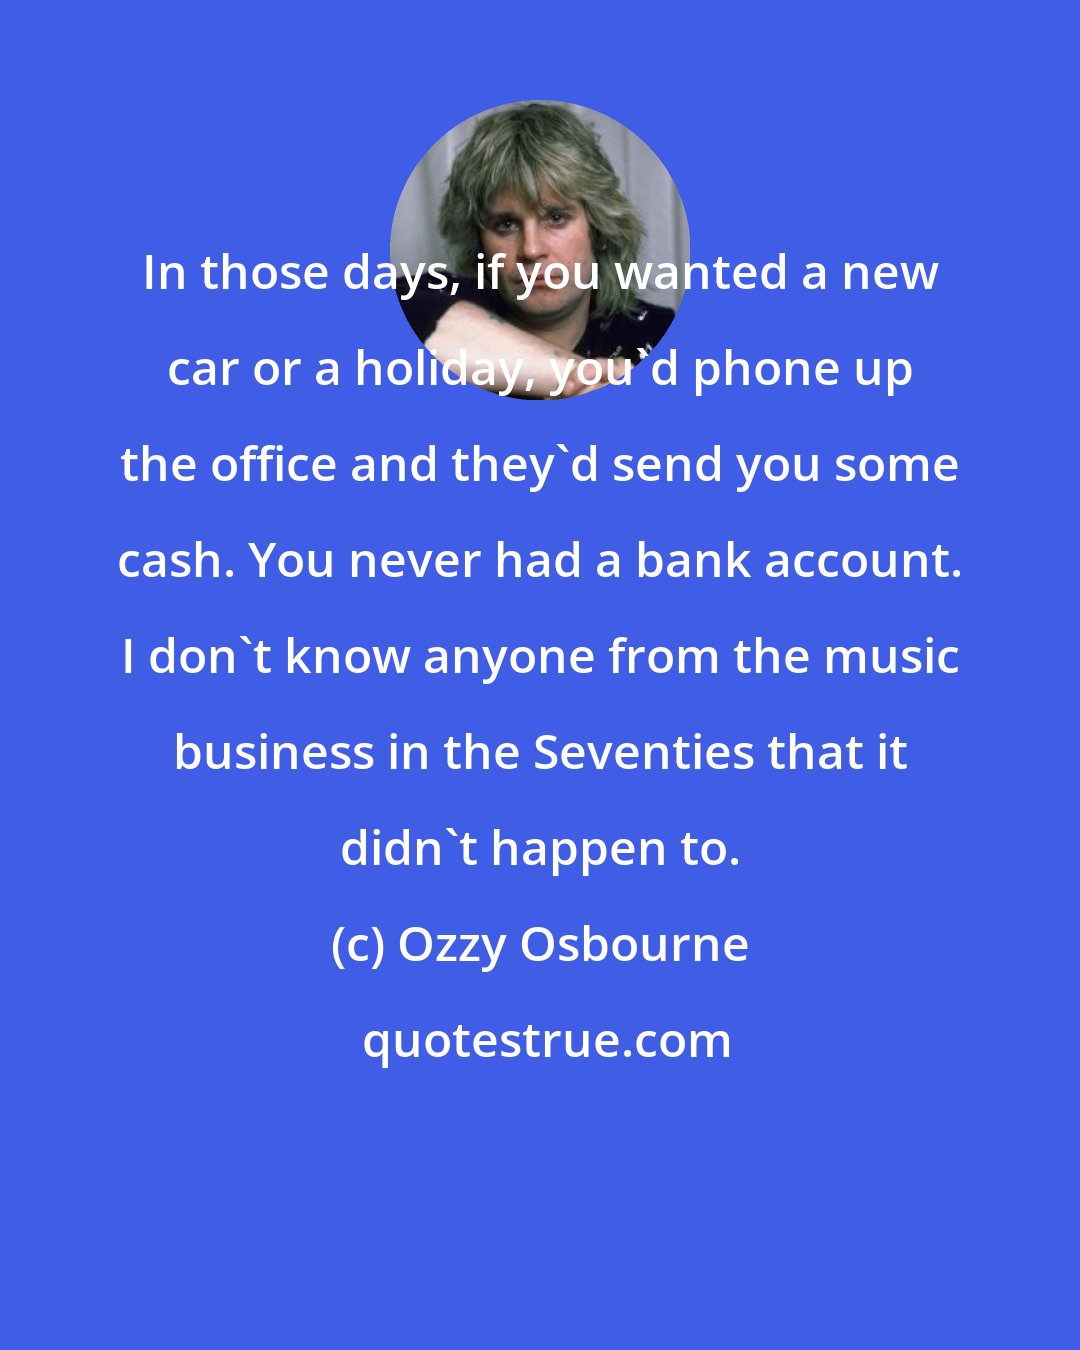 Ozzy Osbourne: In those days, if you wanted a new car or a holiday, you'd phone up the office and they'd send you some cash. You never had a bank account. I don't know anyone from the music business in the Seventies that it didn't happen to.